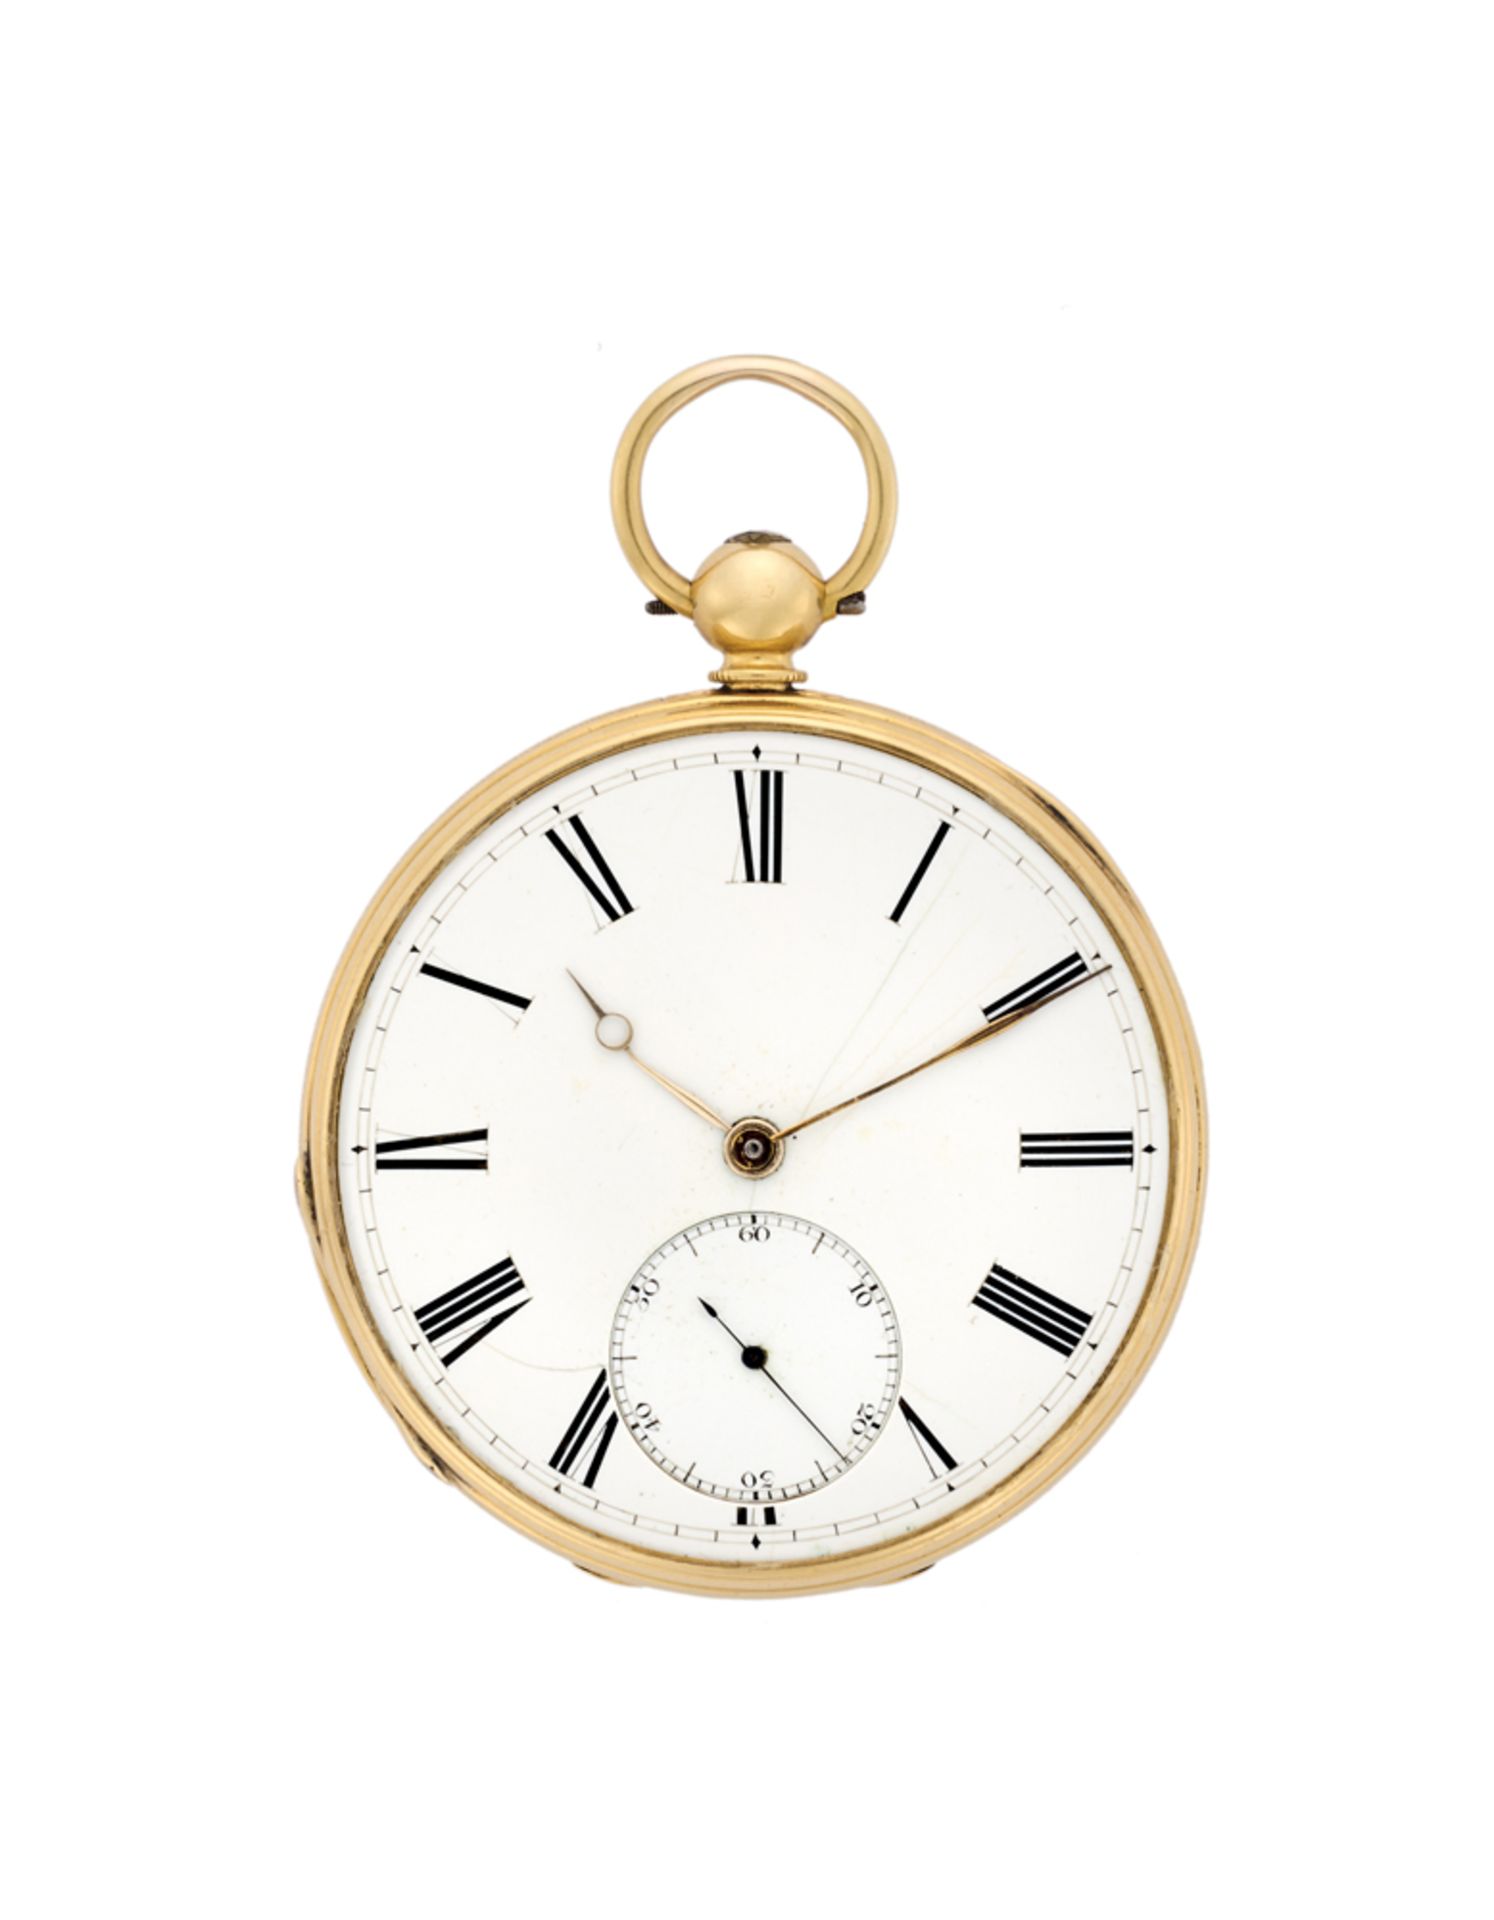 ANONYMOUSGent's 18K gold pocket watch19th centuryKey-wind movementWhite dial with Roman numerals, - Image 2 of 2